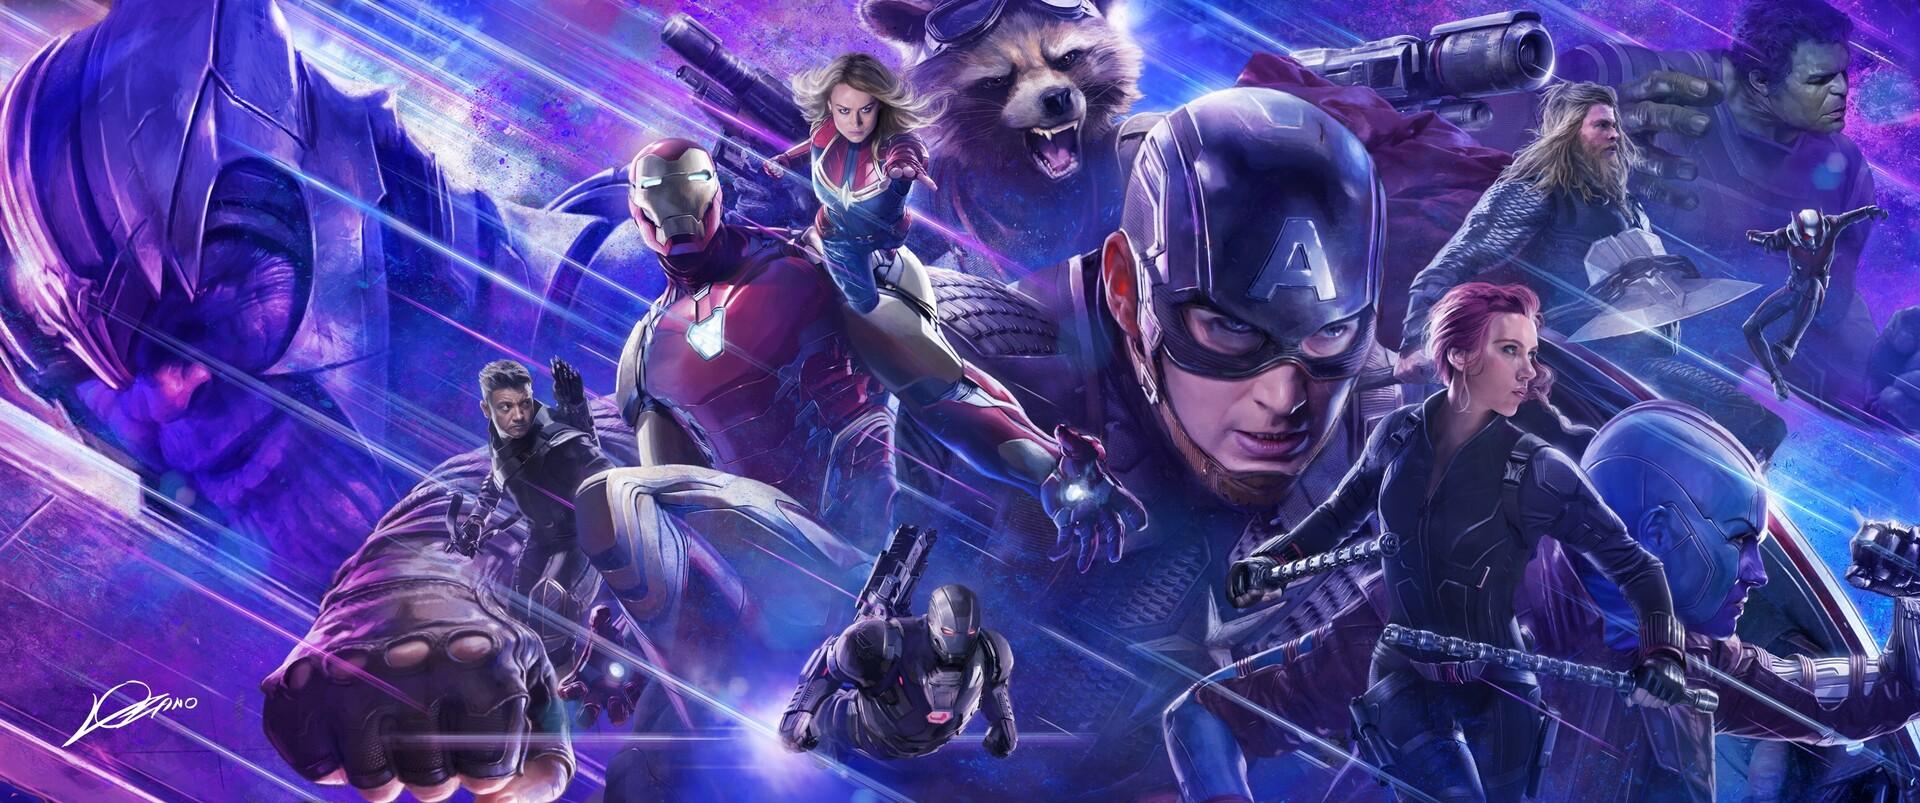 Amazing Avengers Endgame Poster by Alexander Lozano Wallpaper and Free